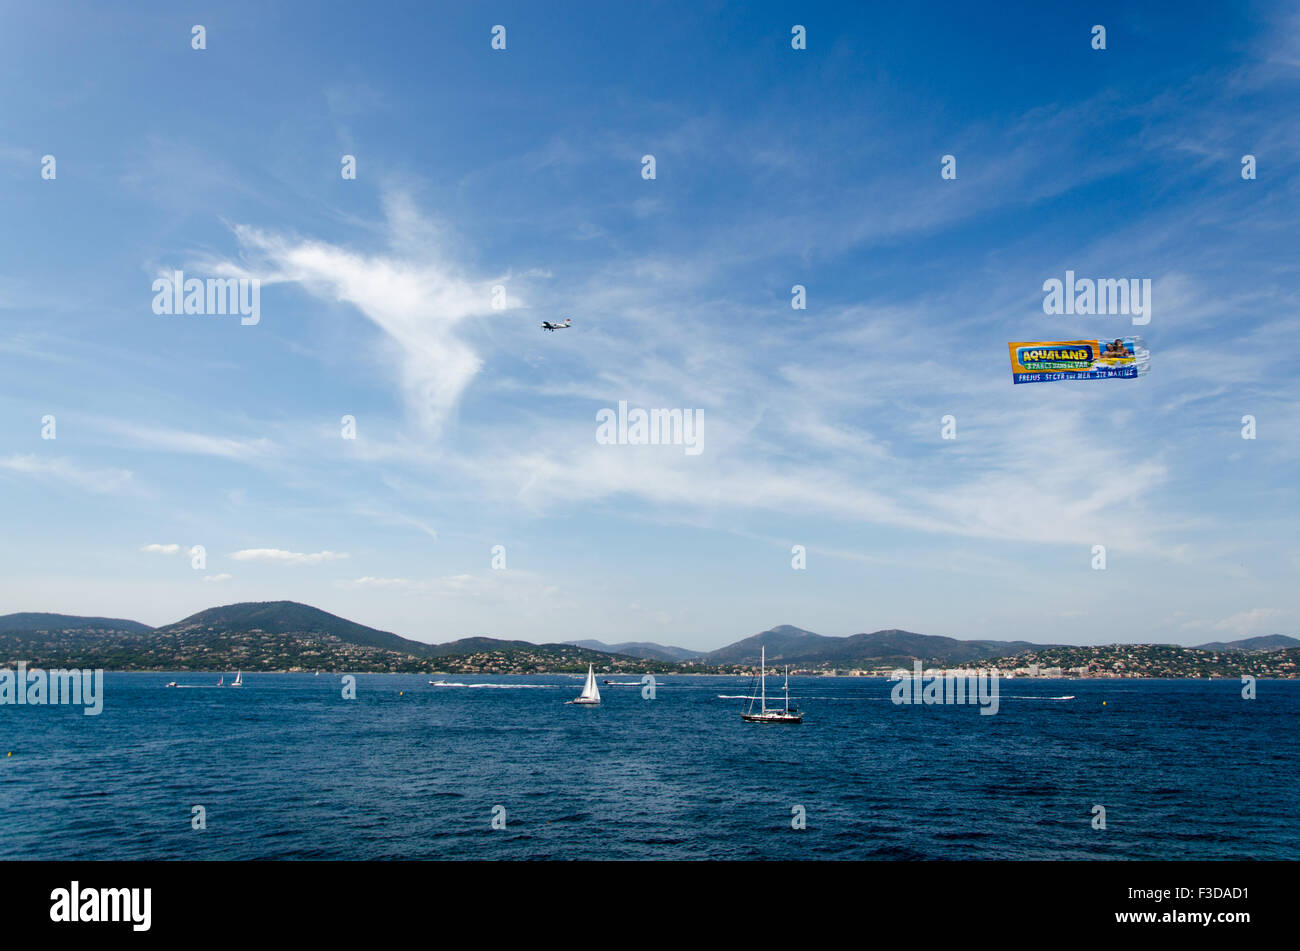 Beautiful blue sea, blue sky, mountain, sailing boats, and an advertising plane on the sky at Saint-Tropez Stock Photo